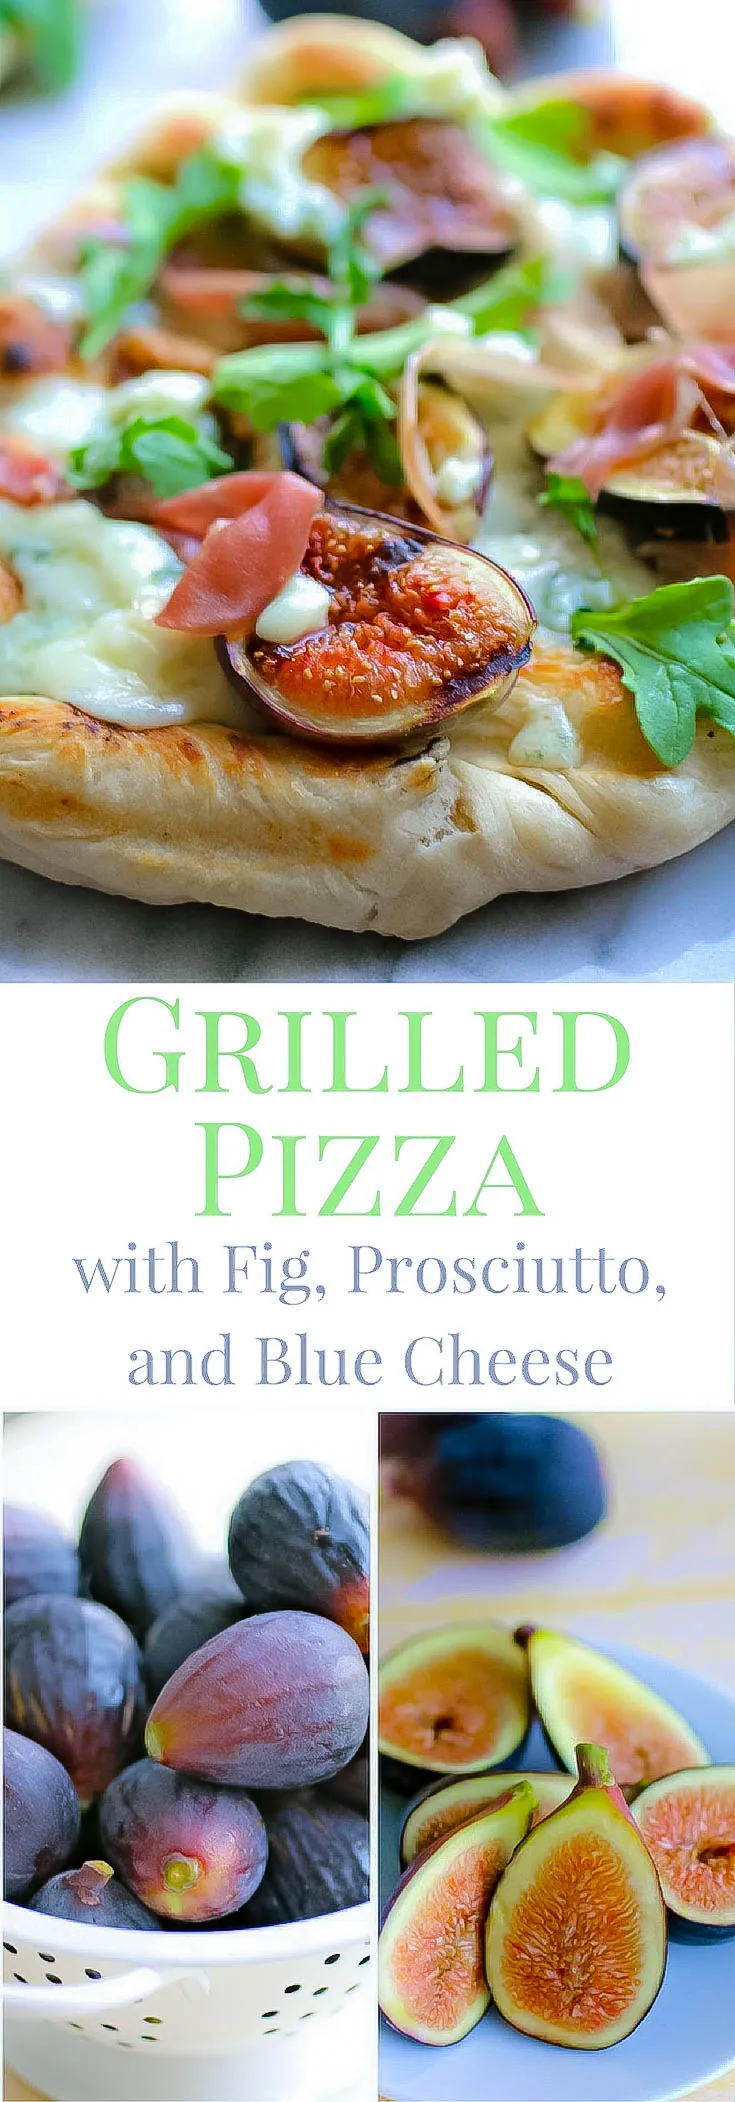 Grilled Pizza with Fig, Prosciutto, and Blue Cheese is a fabulous pizza you'll love! Make this Grilled Pizza with Fig, Prosciutto, and Blue Cheese for dinner soon.